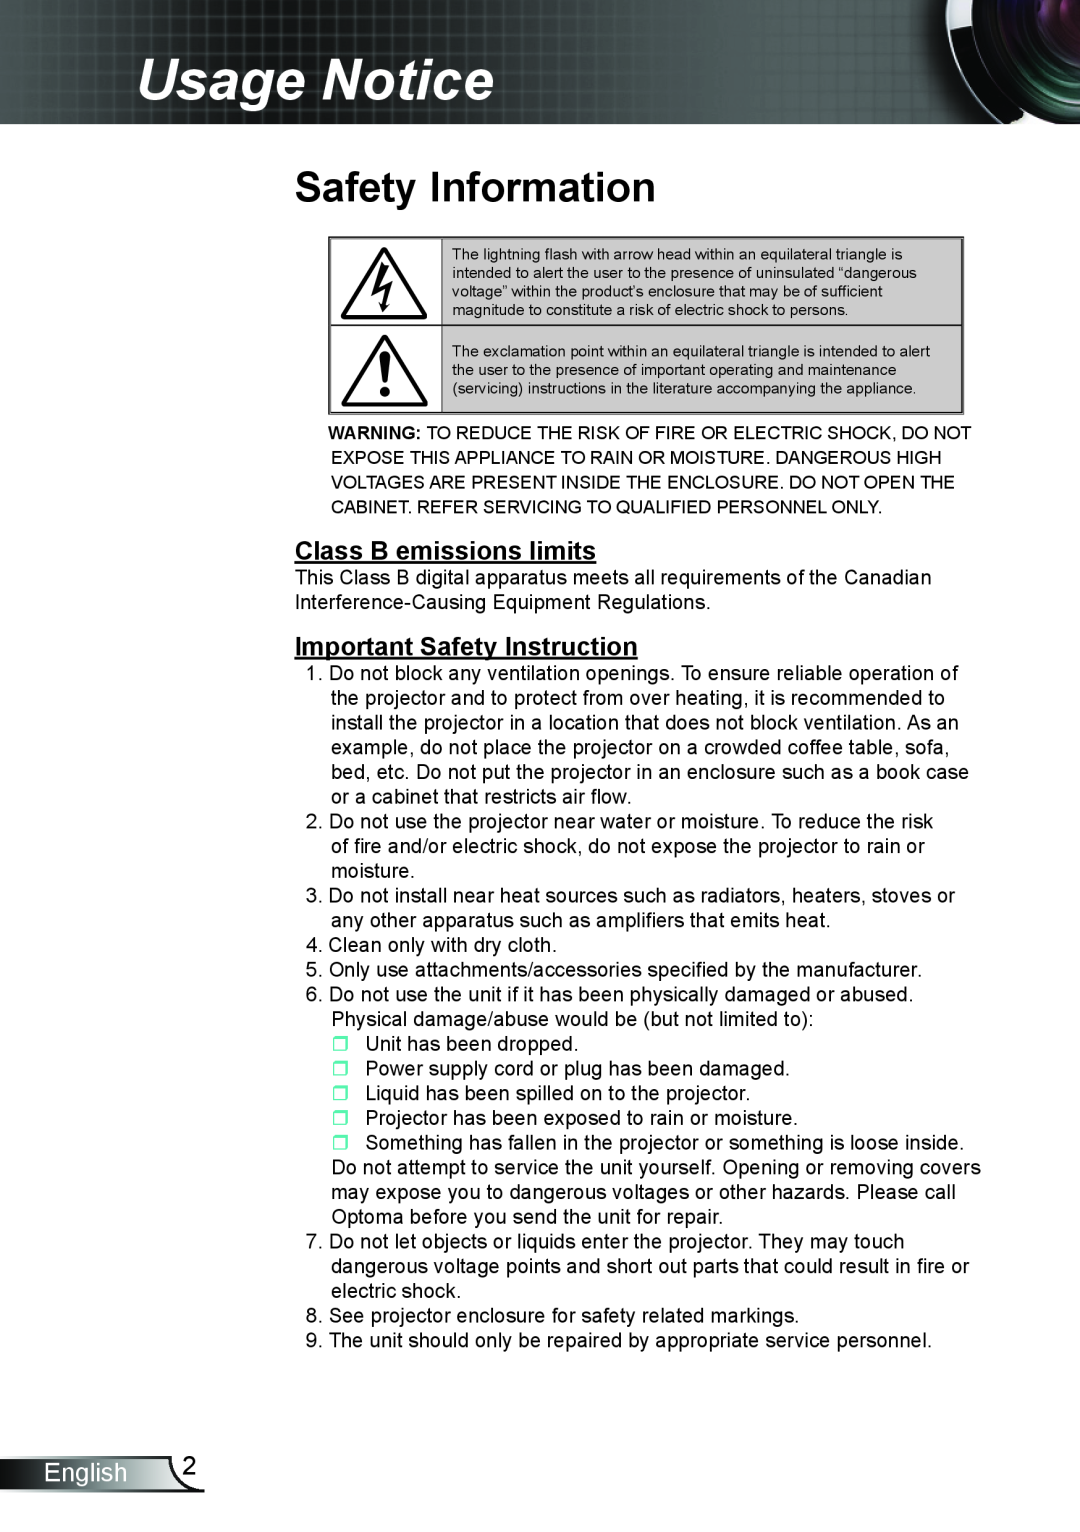 Optoma Technology TW615GOV manual Usage Notice, Safety Information, Class B emissions limits, Important Safety Instruction 